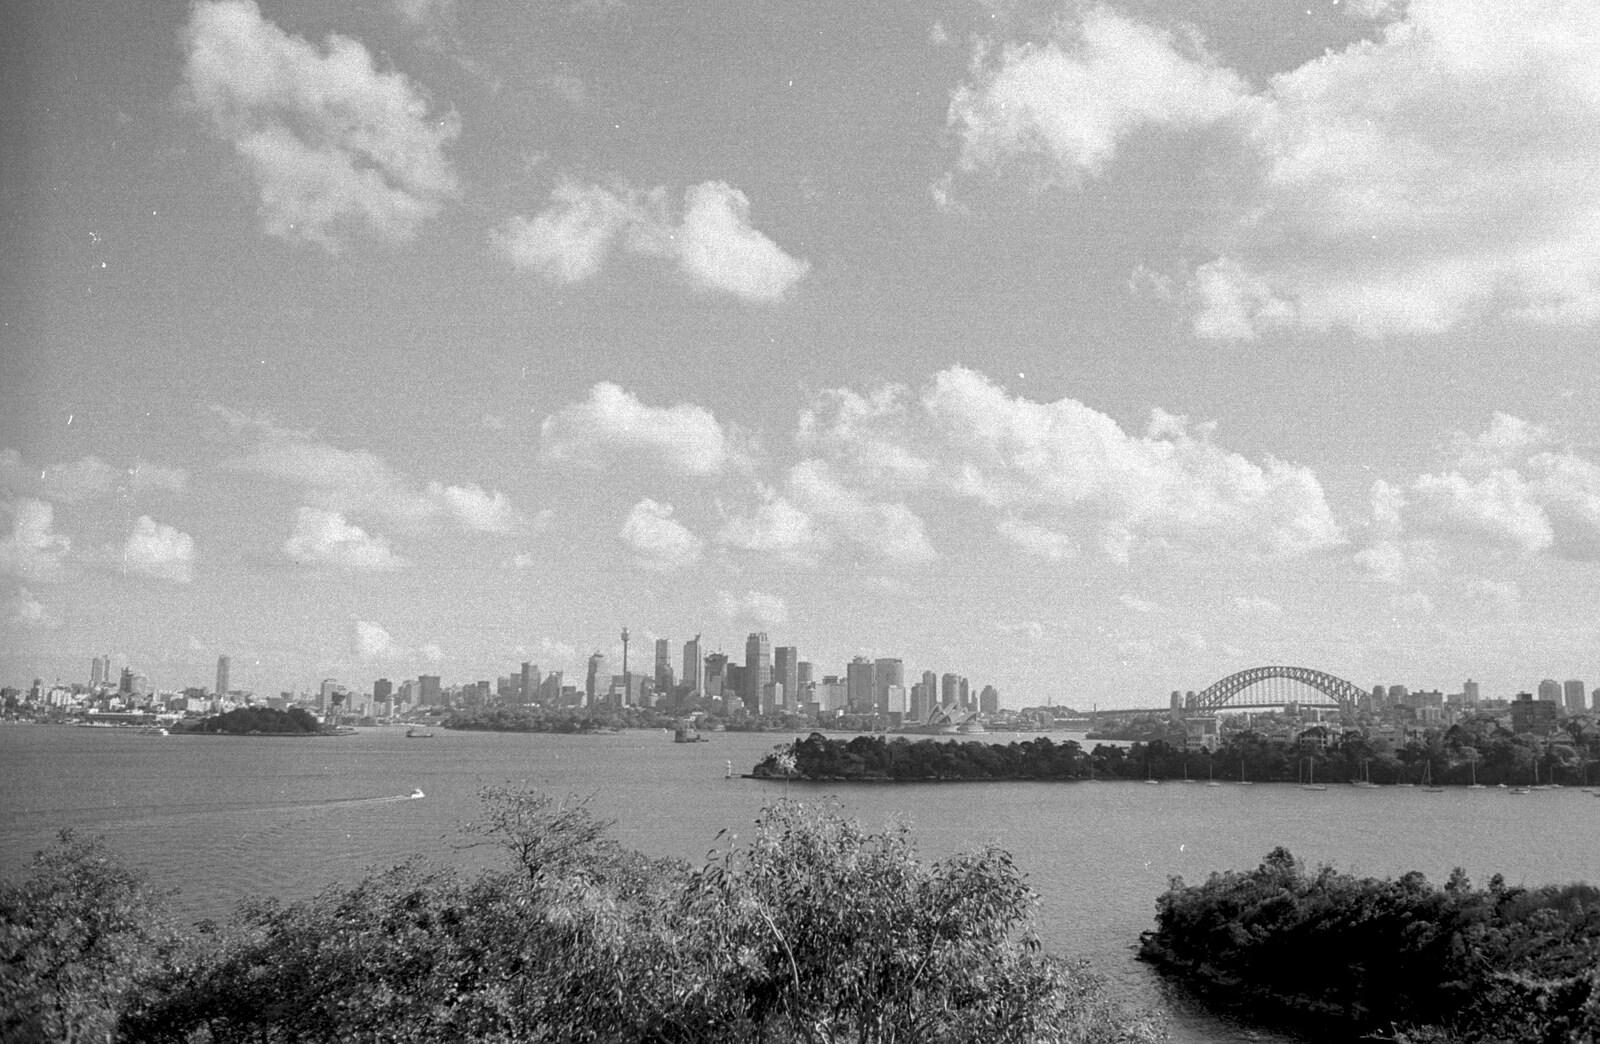 A wide-angle view of Sydney Harbour from A Trip to the Zoo, Sydney, Australia - 7th April 2000